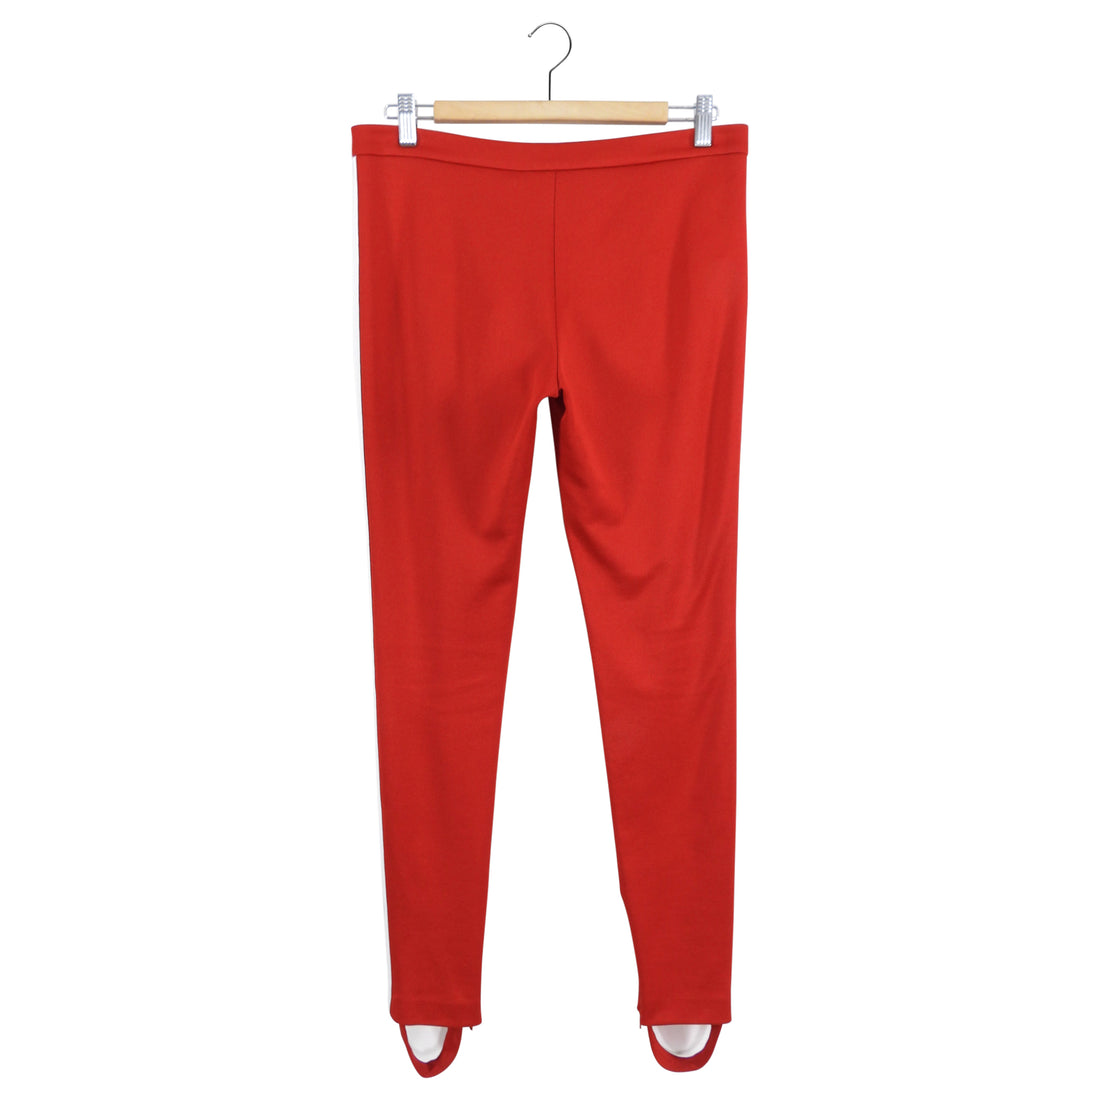 Gucci Red Knit Jersey Stripe Leggings / Joggers - M – I MISS YOU